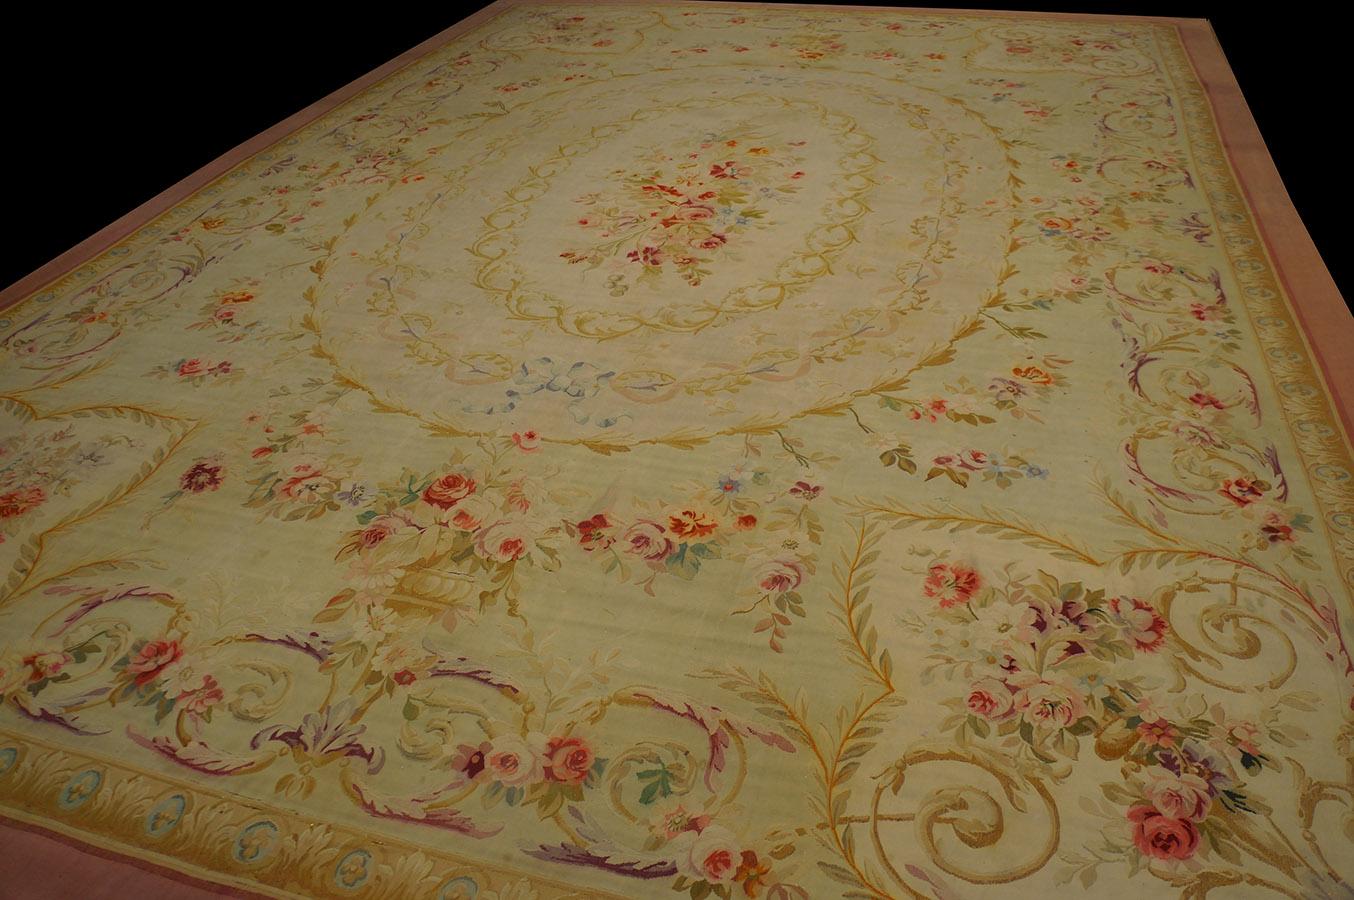 Hand-Woven Early 20th Century French Aubusson Carpet ( 14'5' x 20'9'' - 440 x 633 )